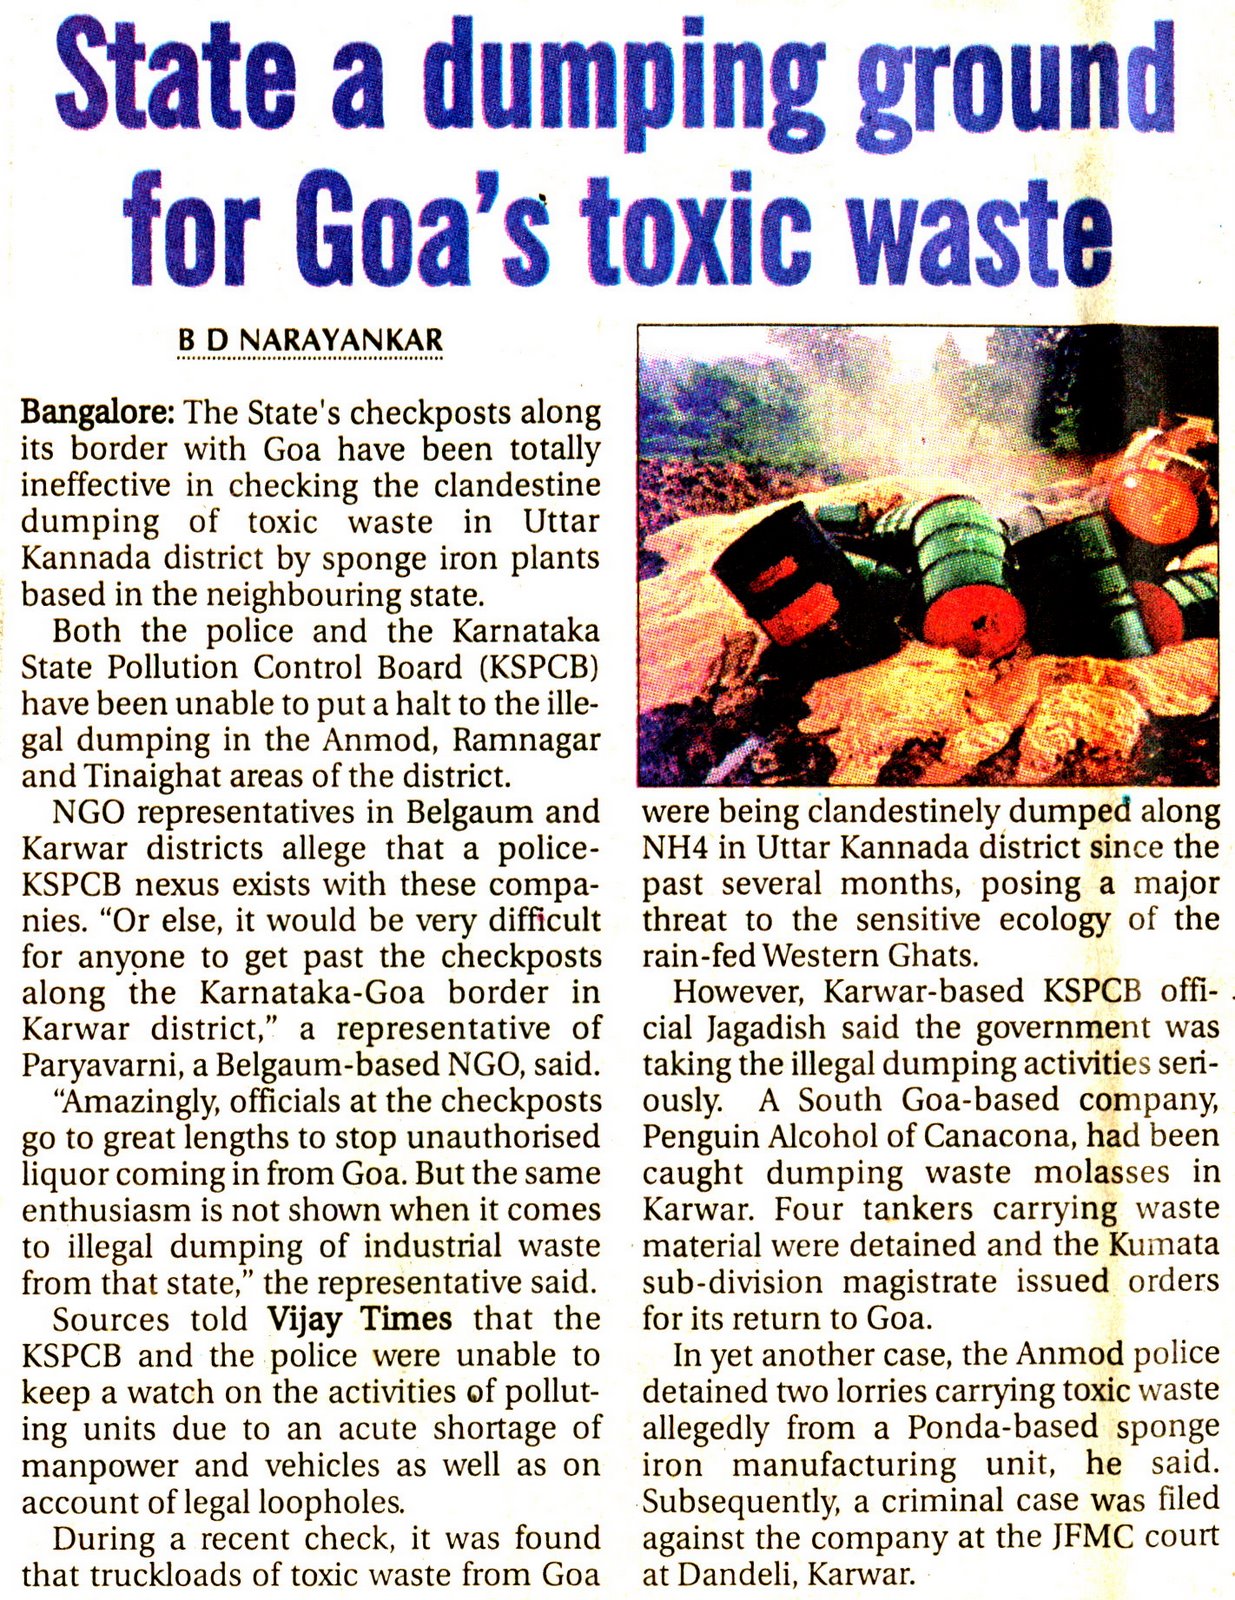 [State+a+dumping+ground+for+Goa]